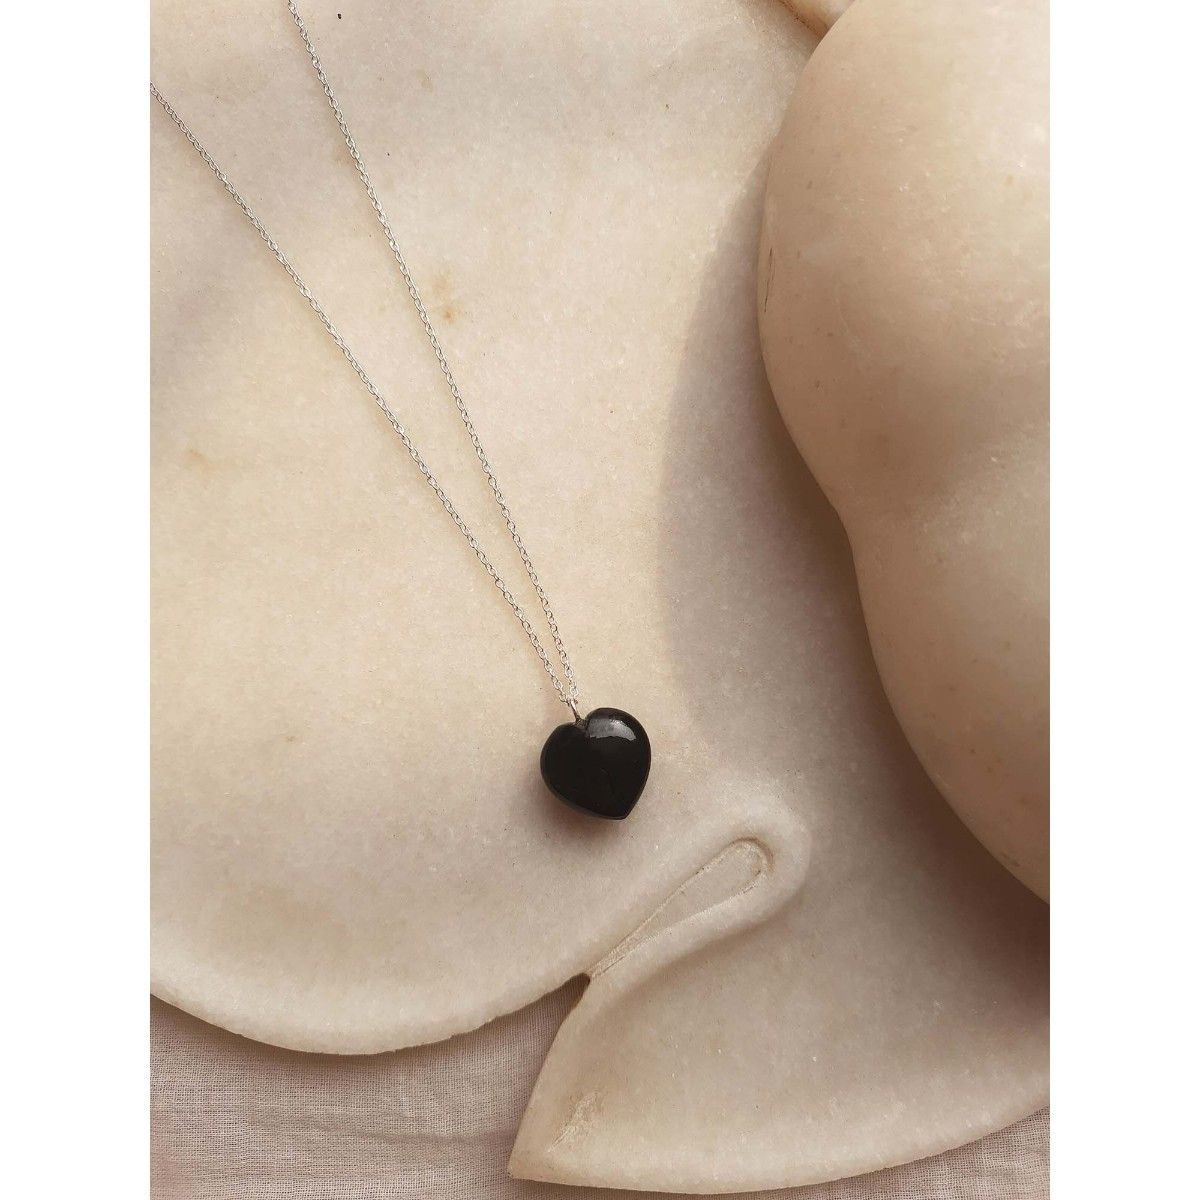 Buy Sterling Silver Natural Black Onyx Loveheart Love Heart Drop Pendant &  Necklace 16mm Small Online in India - Etsy